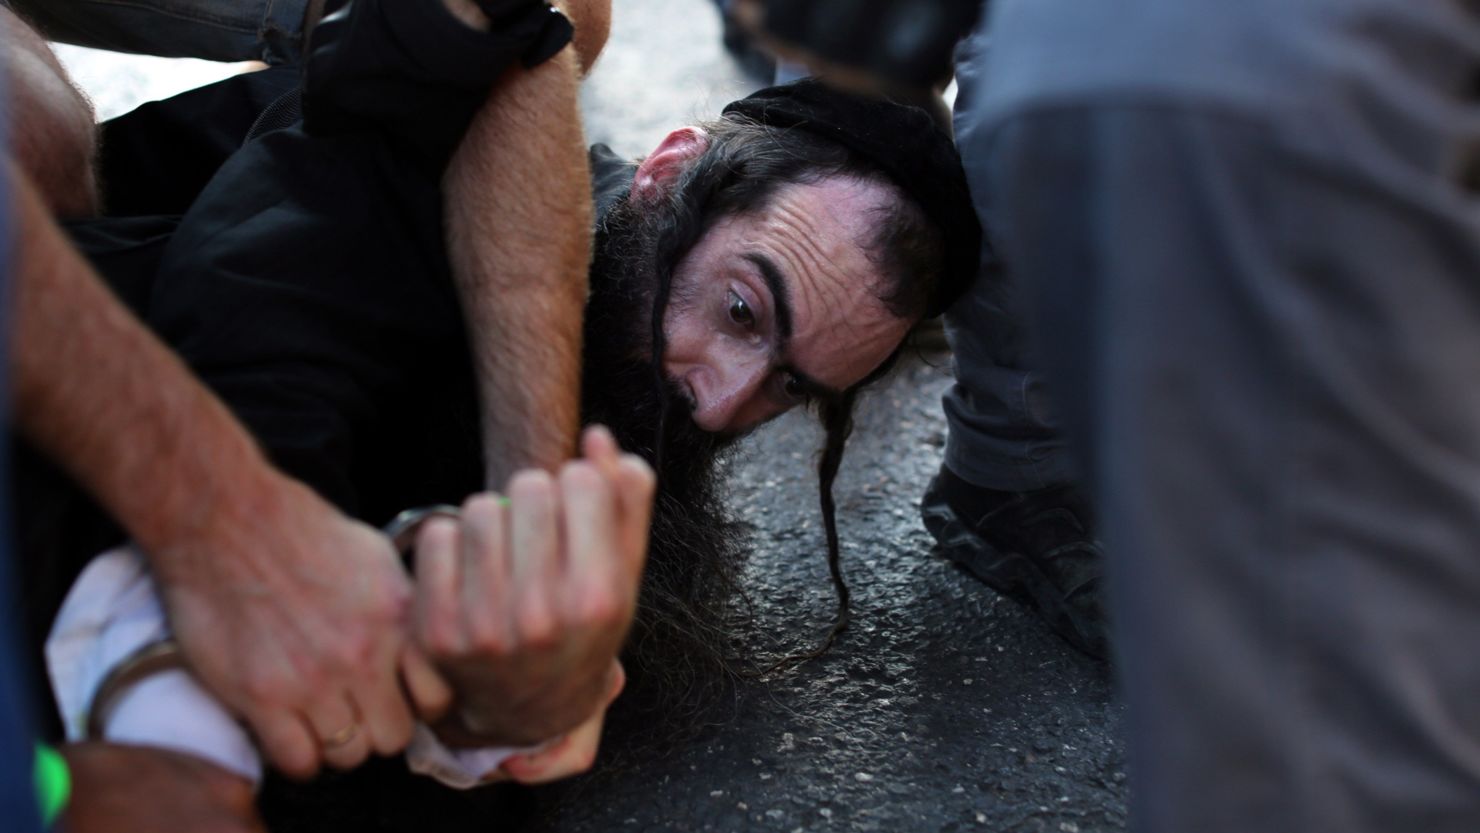 Yishai Shlissel in handcuffs in the aftermath of the knife attack in Jerusalem last July.